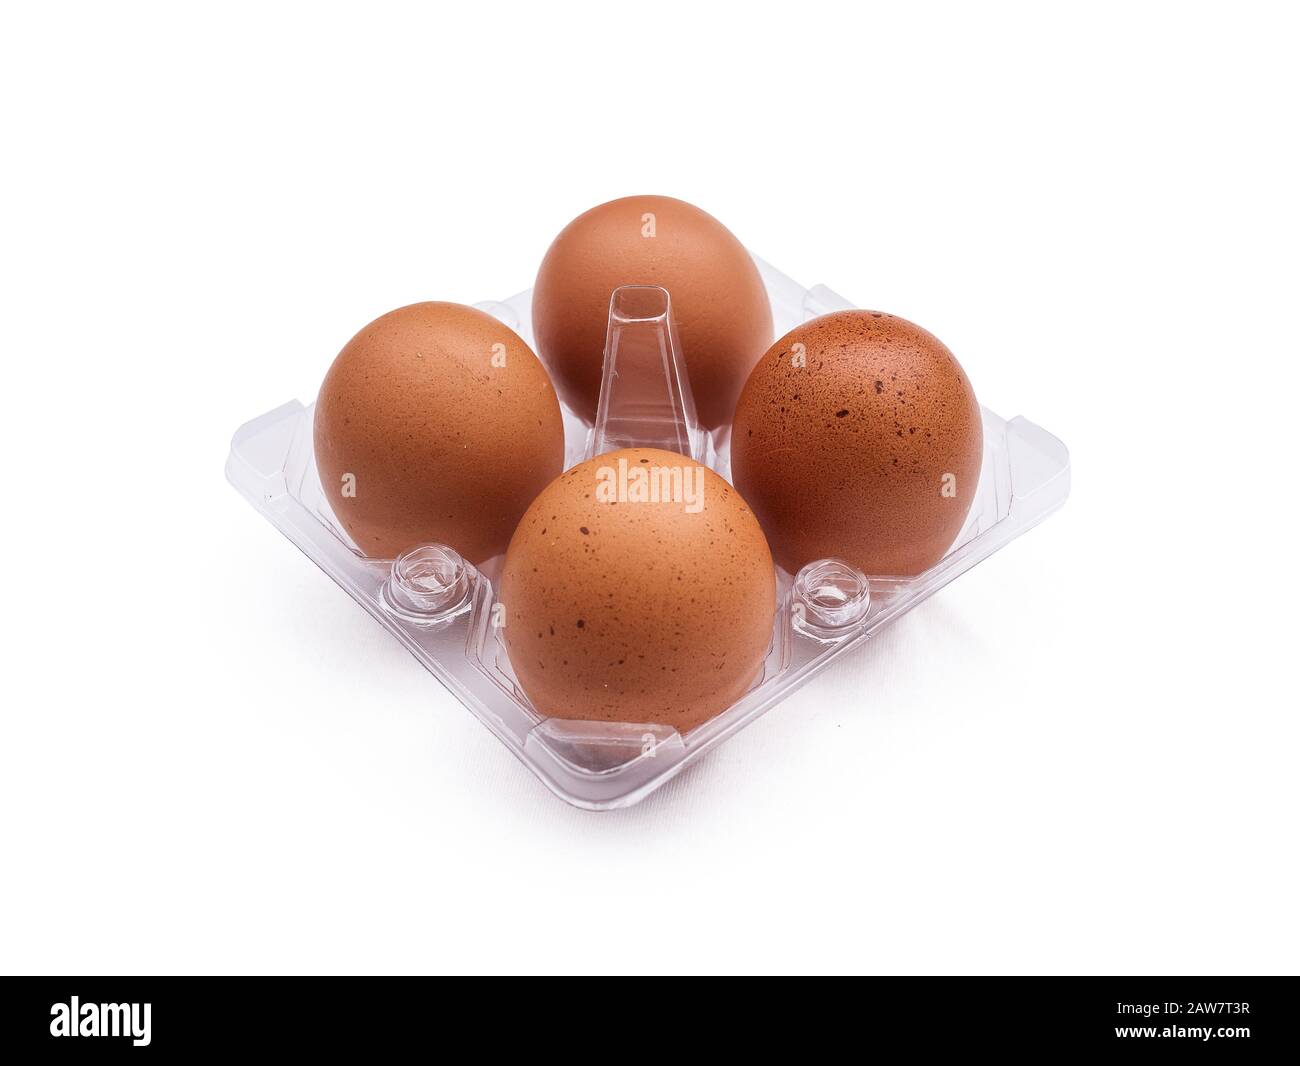 four eggs on the tray isolated on white background. food photo shot in studio with clipping path Stock Photo